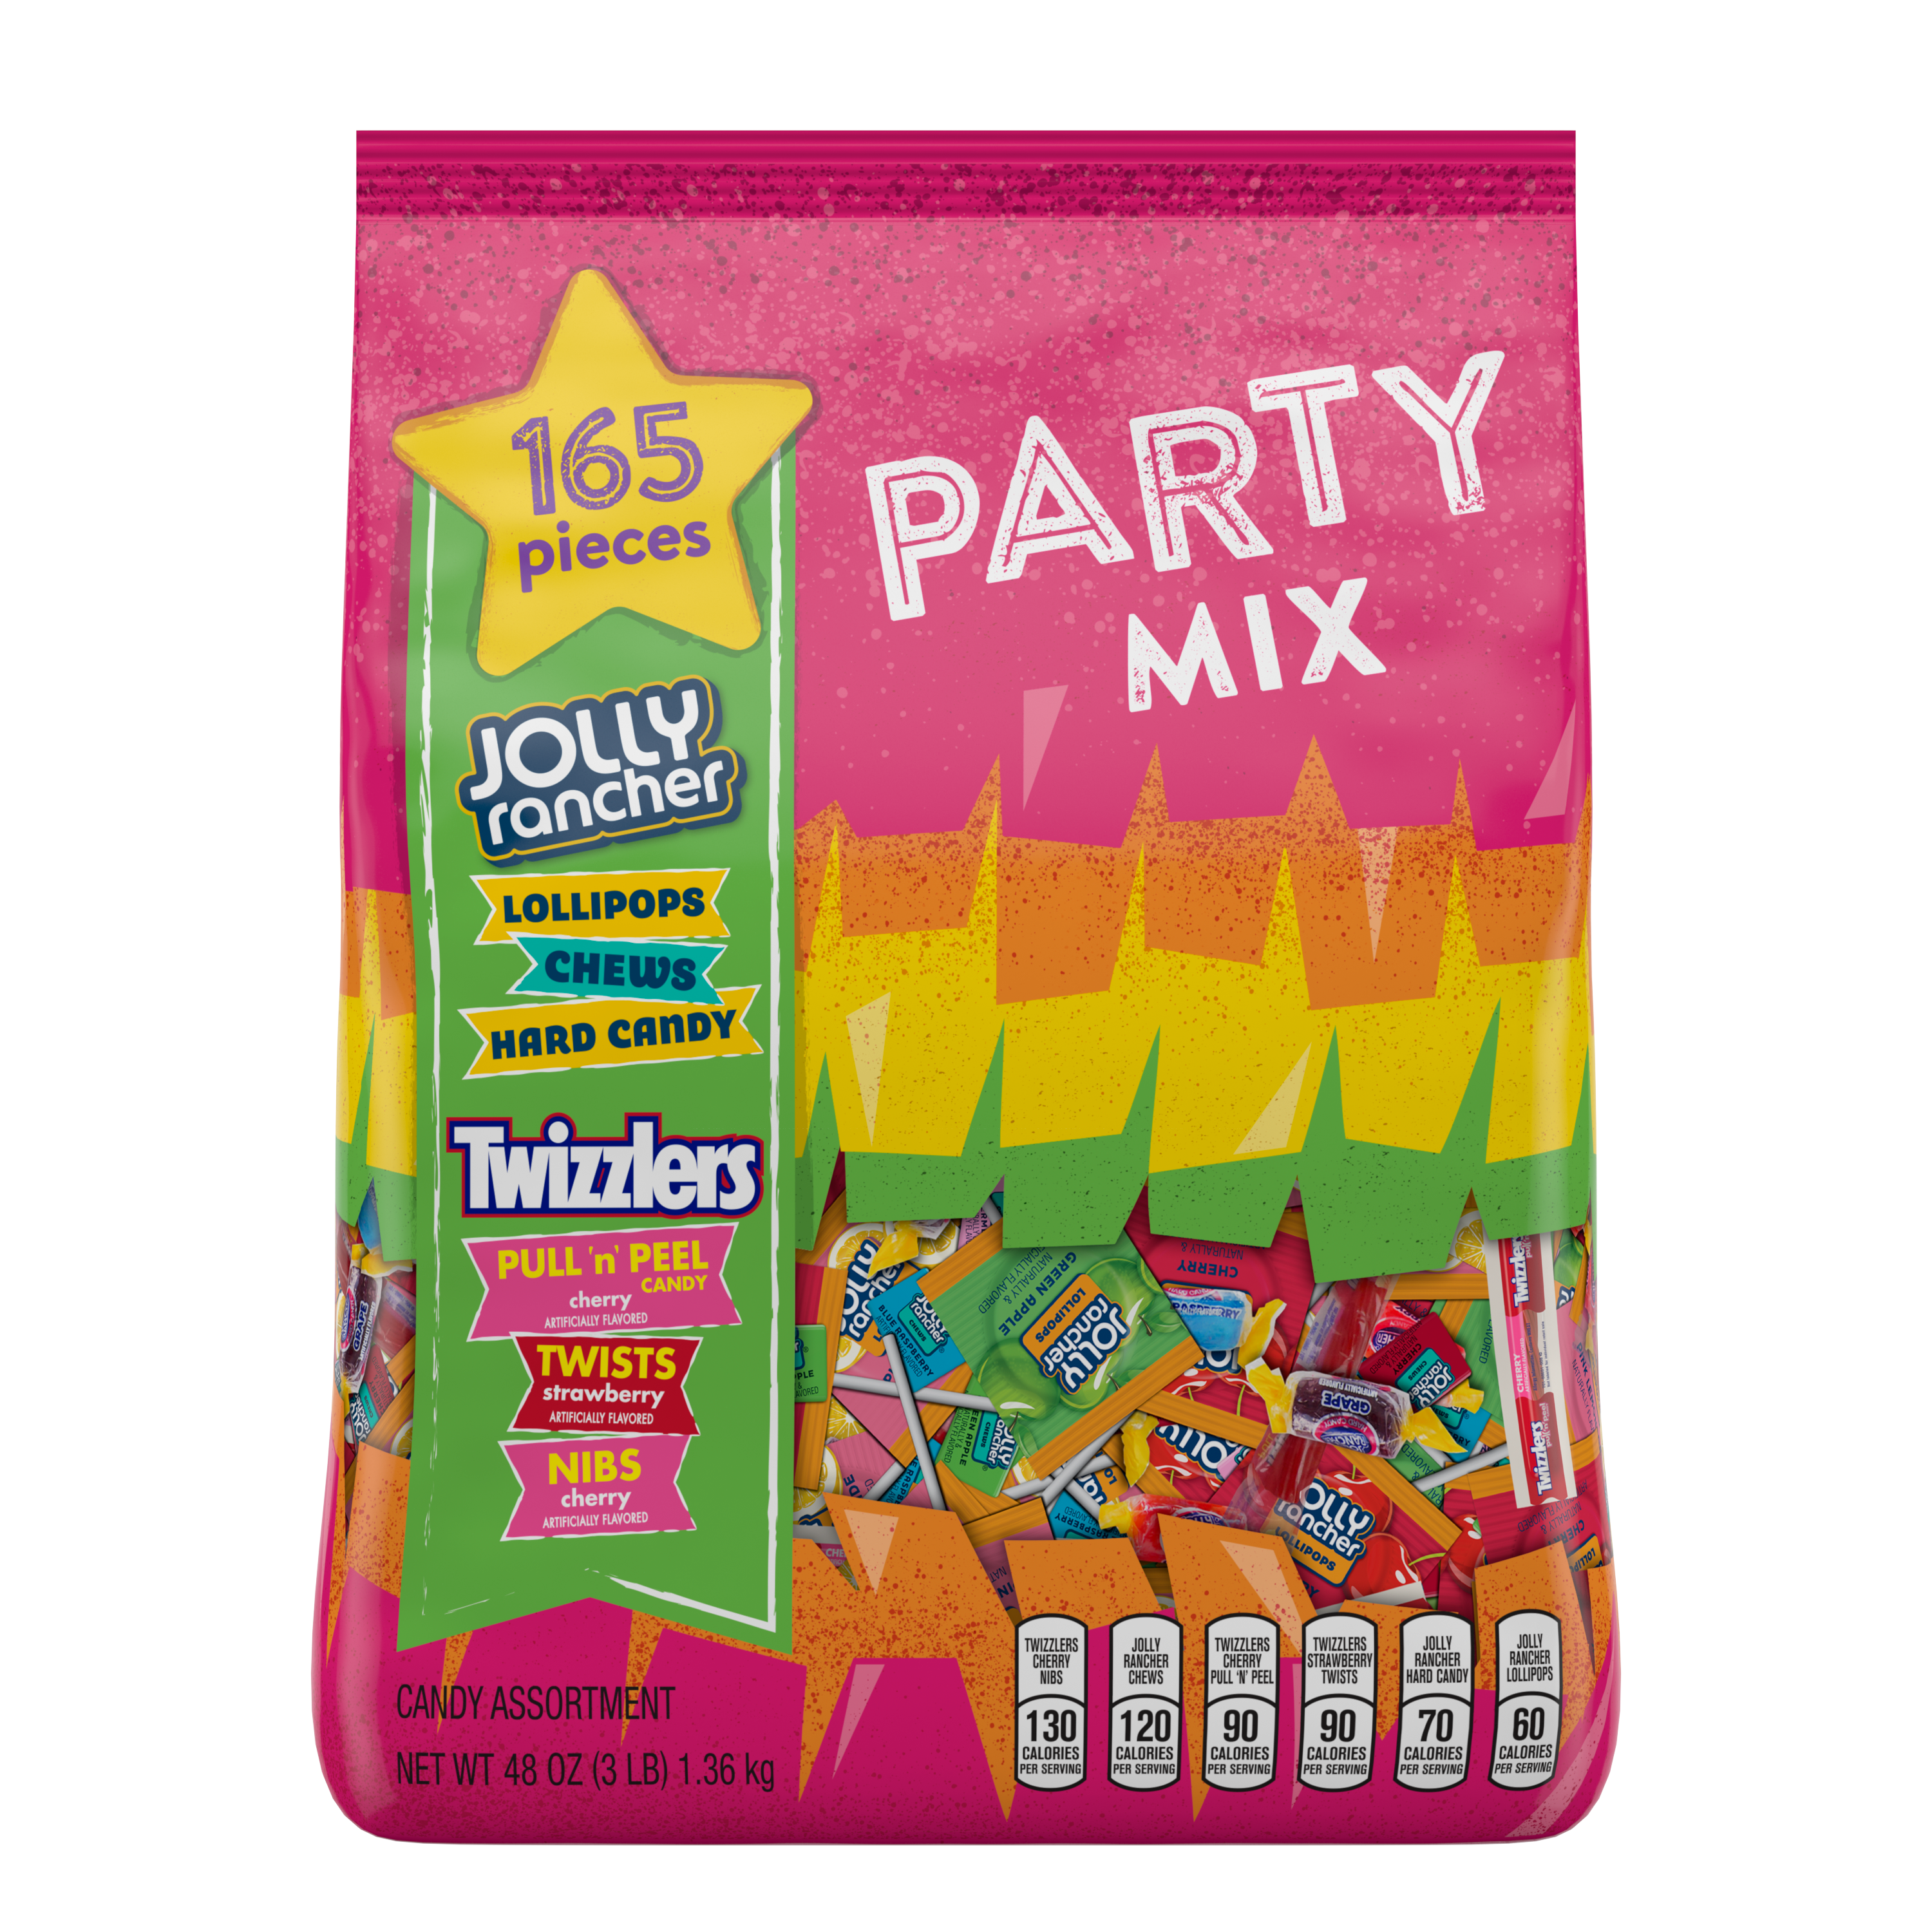 TWIZZLERS & JOLLY RANCHER Party Mix Assortment, 48 oz bag, 165 pieces - Front of Package